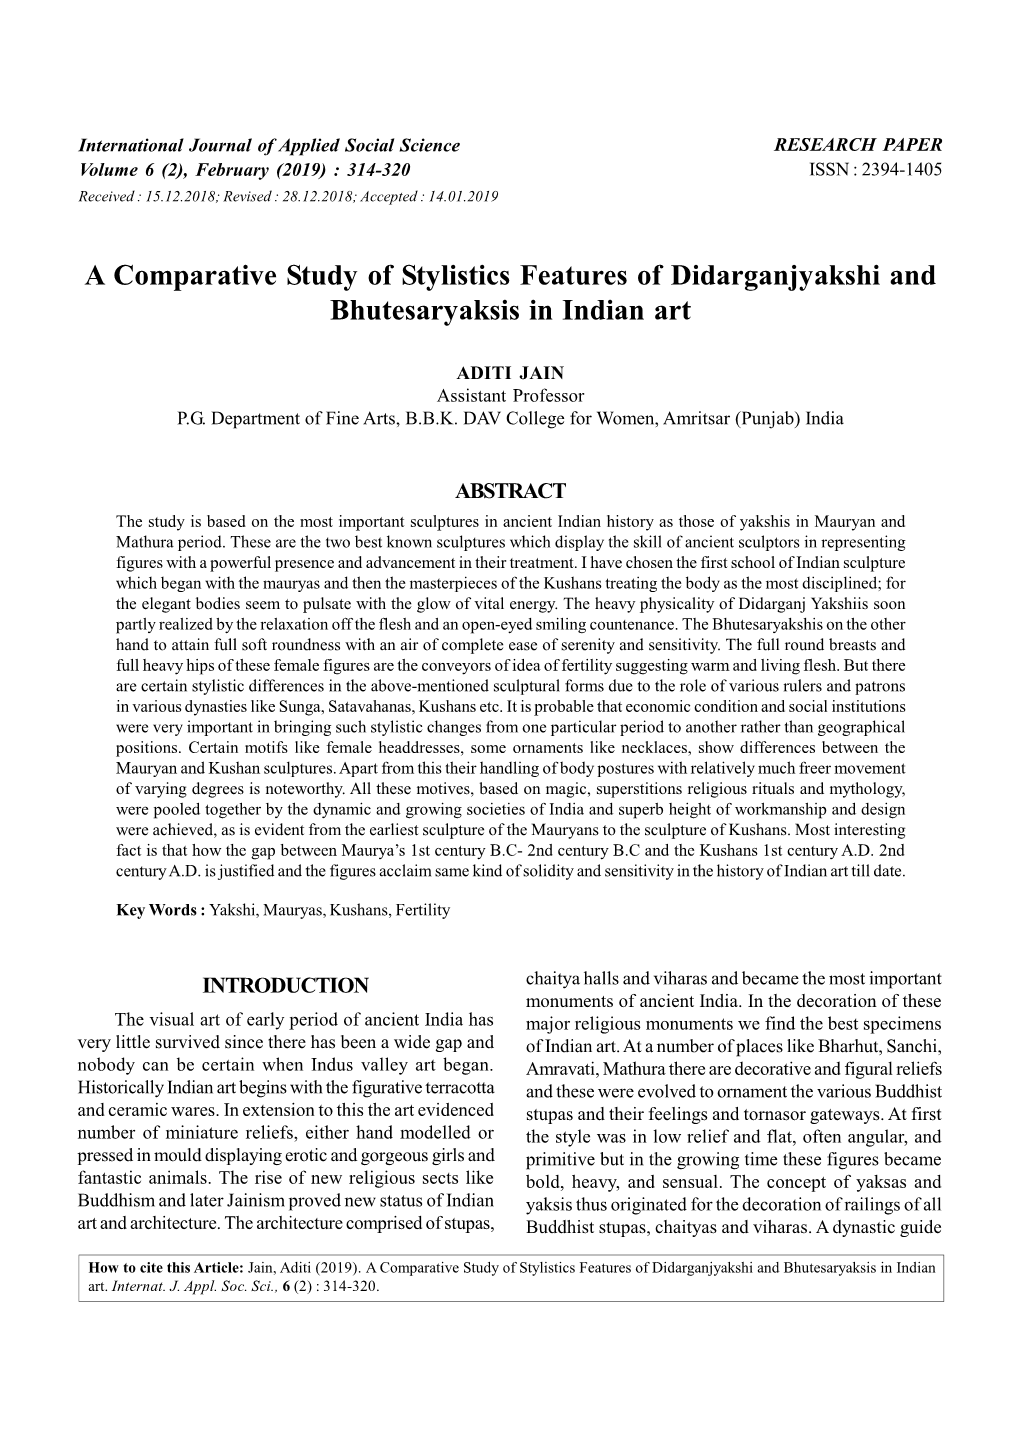 A Comparative Study of Stylistics Features of Didarganjyakshi and Bhutesaryaksis in Indian Art